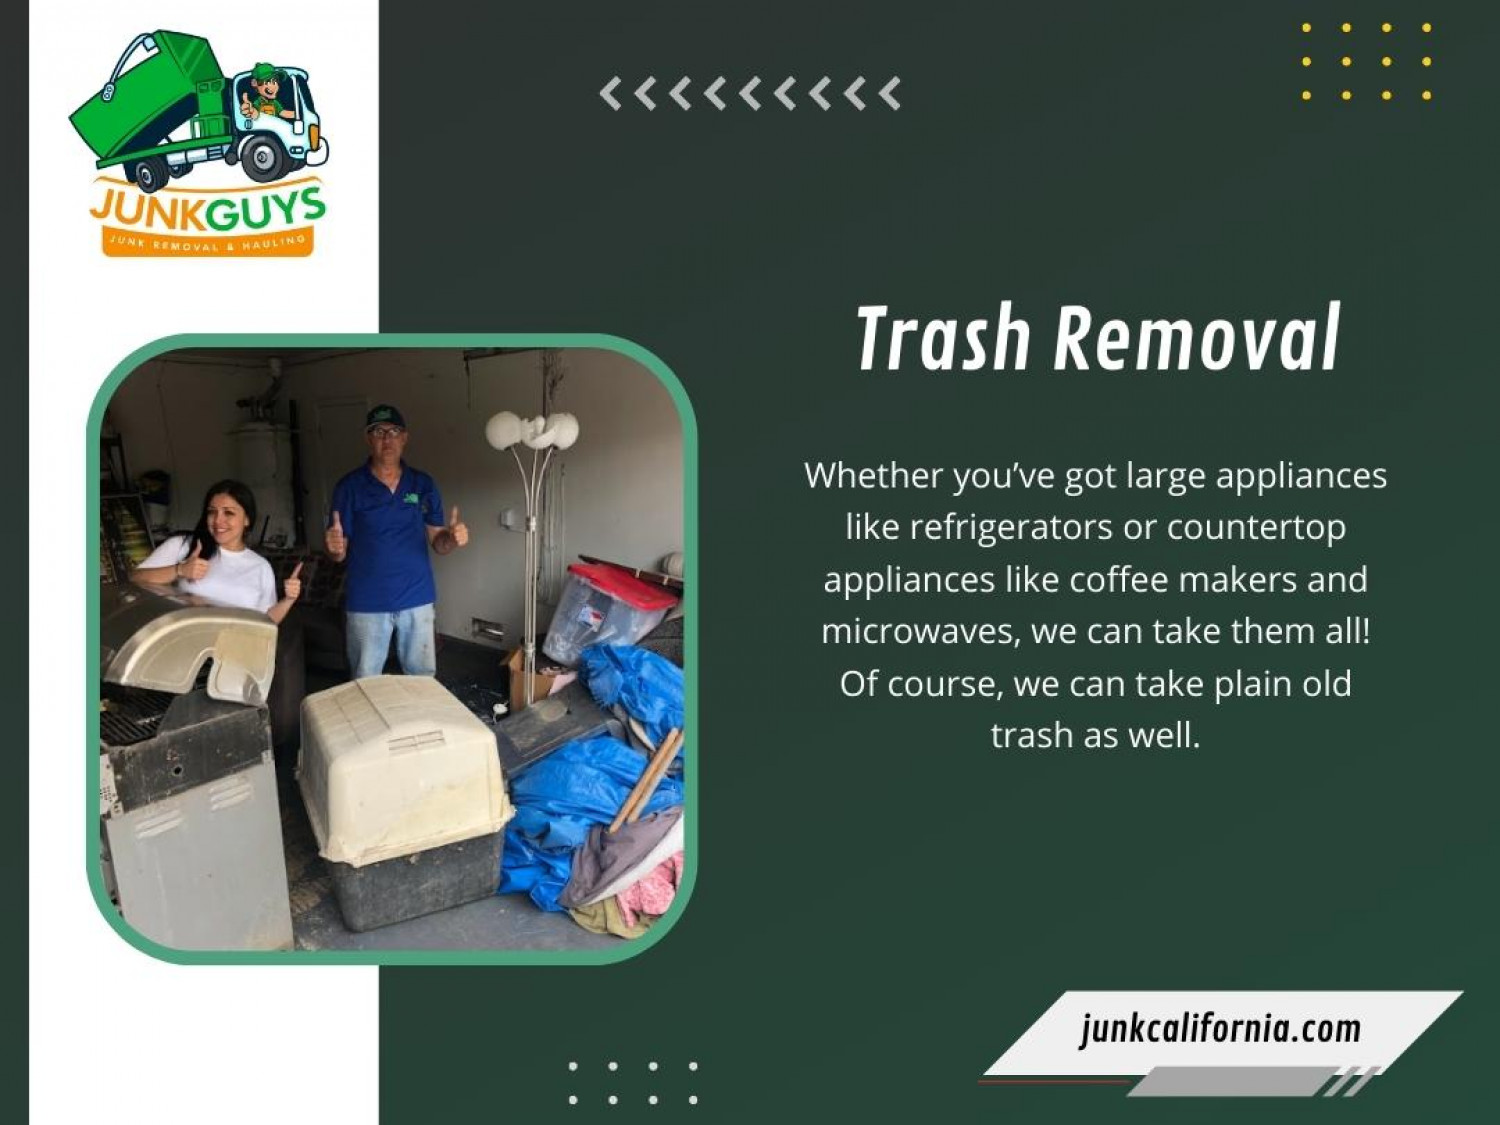 Trash Removal Infographic